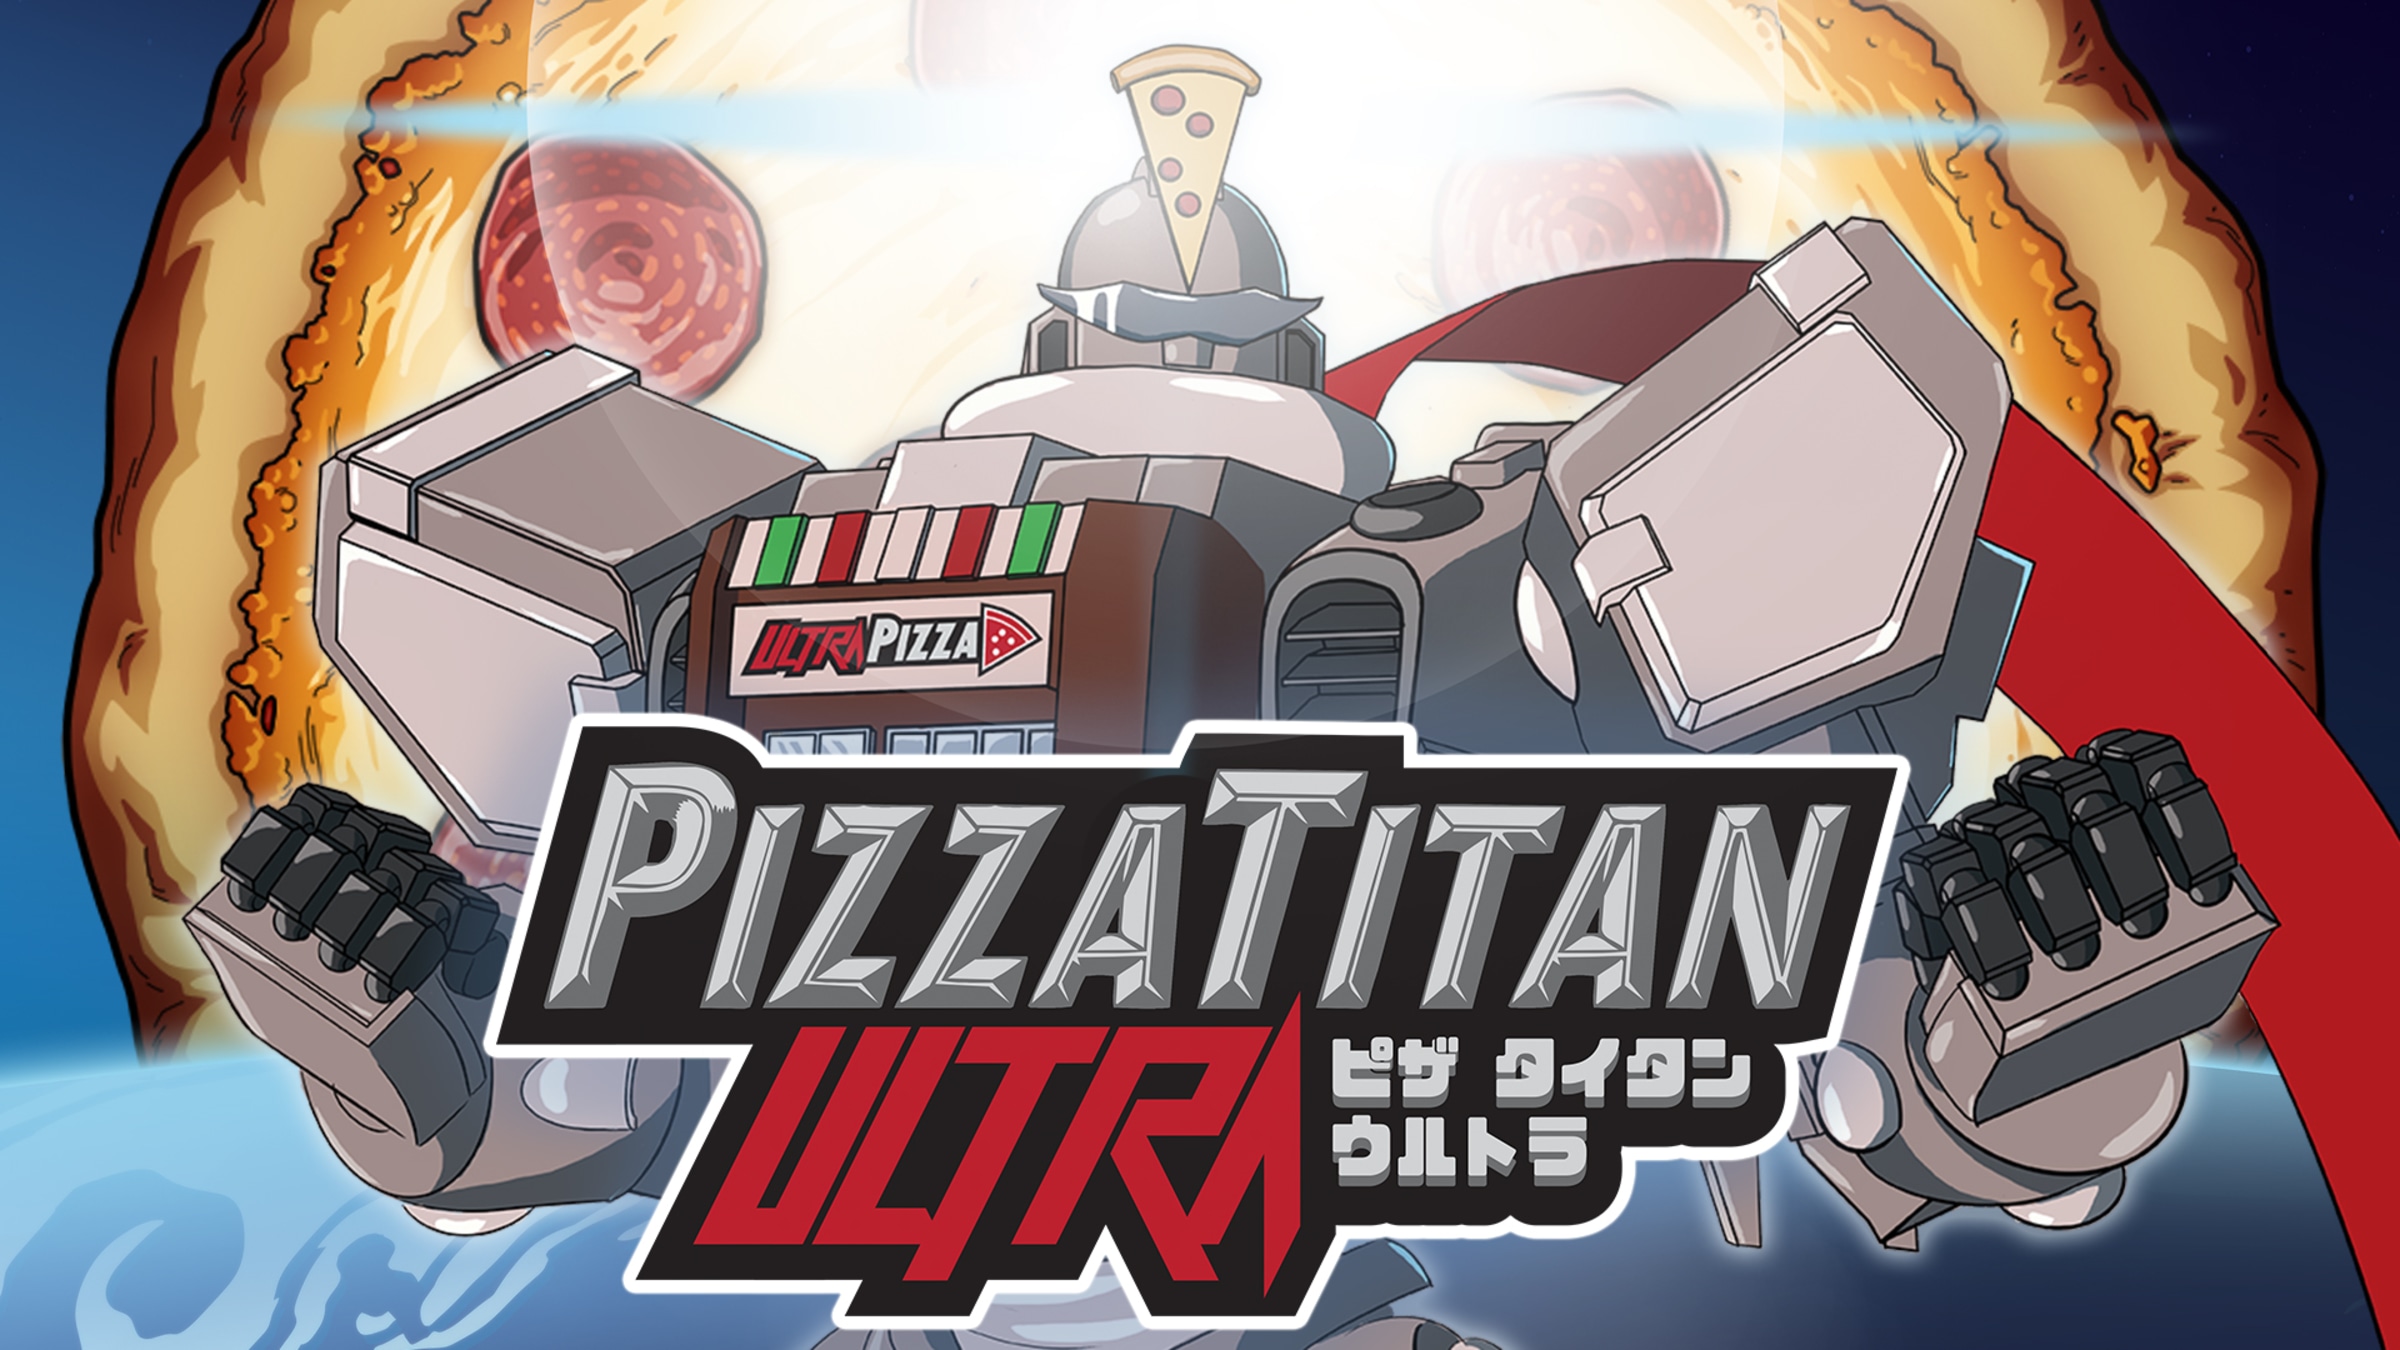 Why Pizza? for Nintendo Switch - Nintendo Official Site